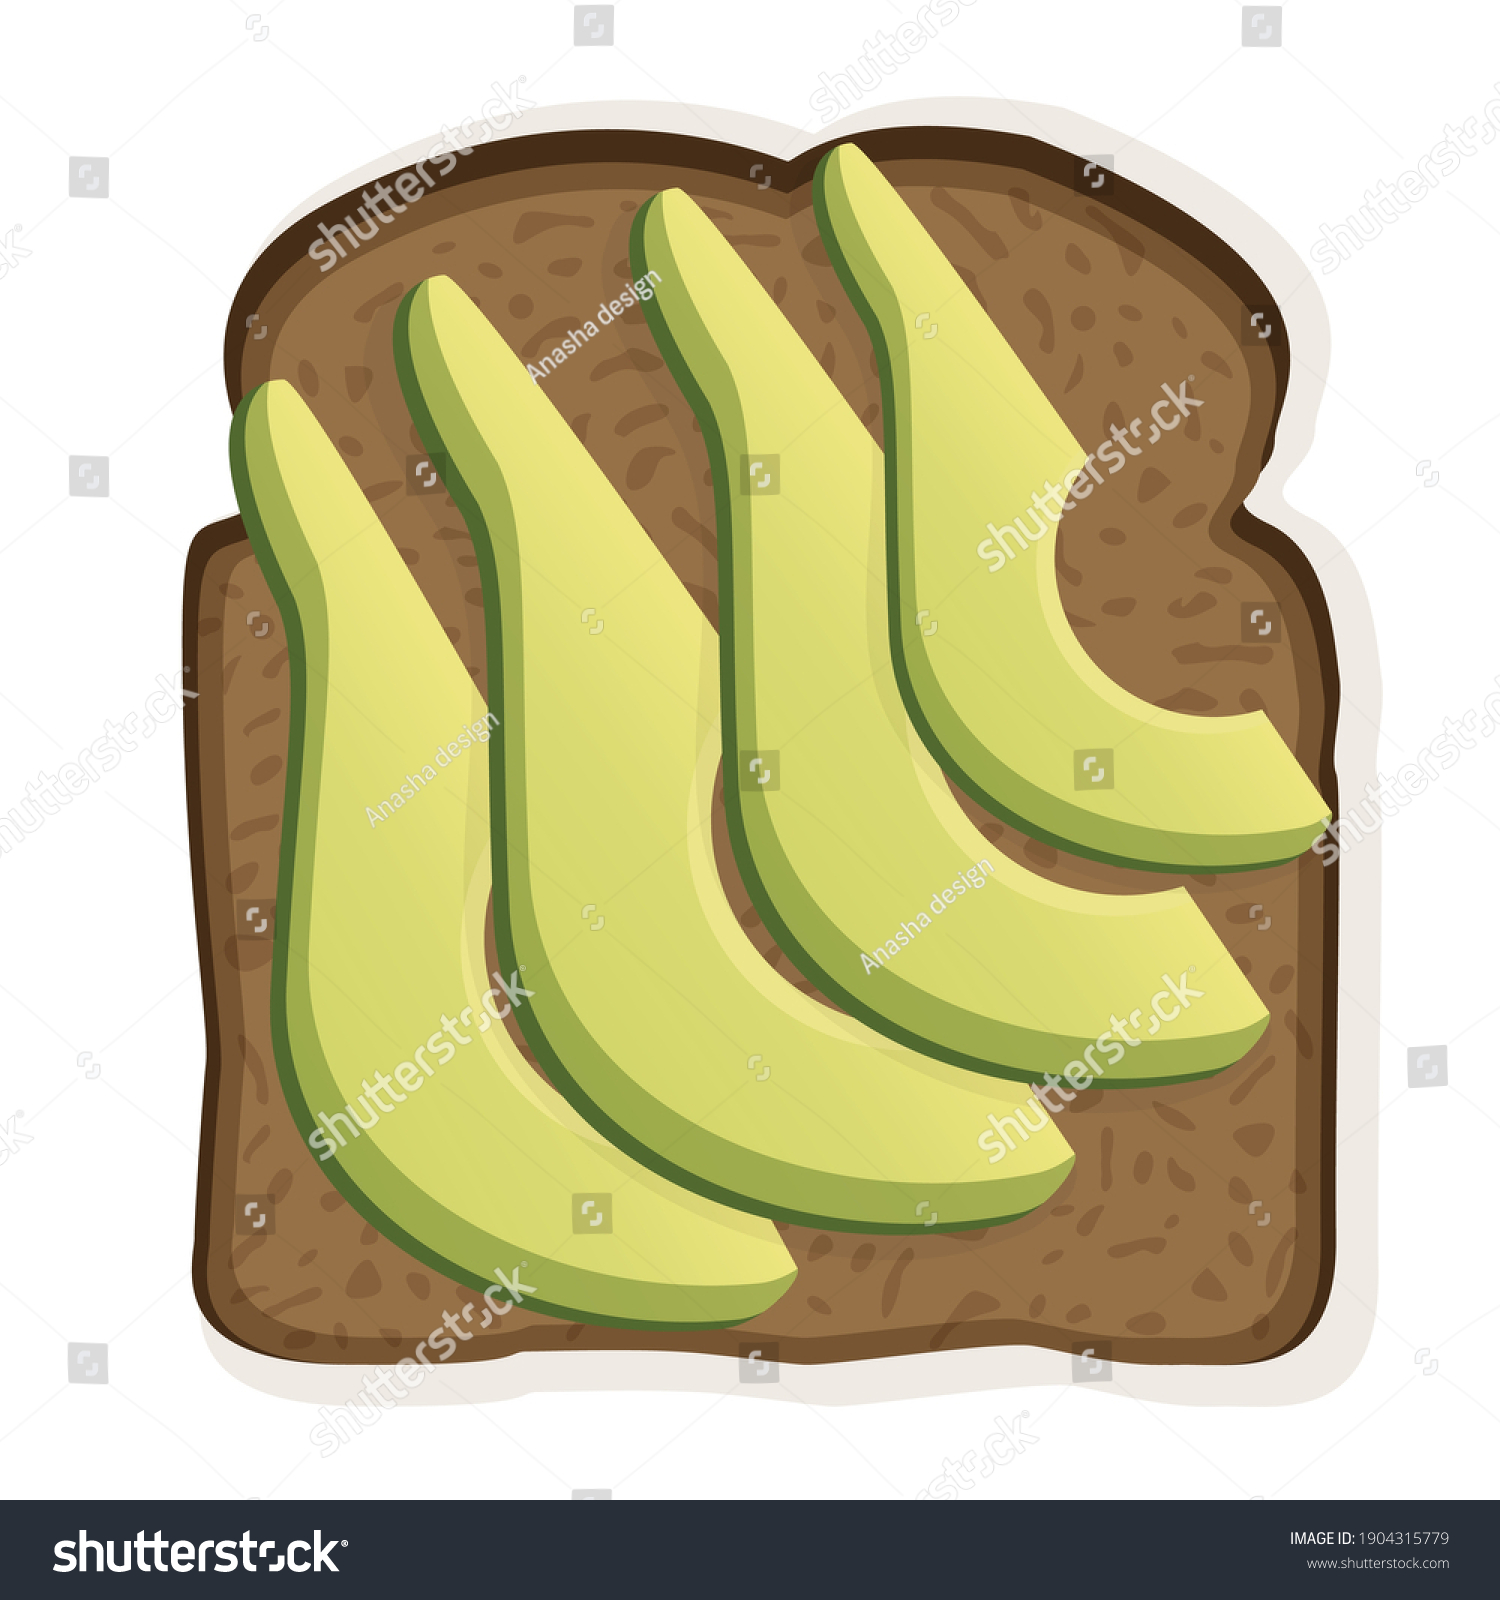 SVG of Sandwich with black toast bread and avocado slices. Vector illustration of a healthy breakfast for poster, advertisement, menu, web, restaurant, cafe. Healthy lifestyle. svg